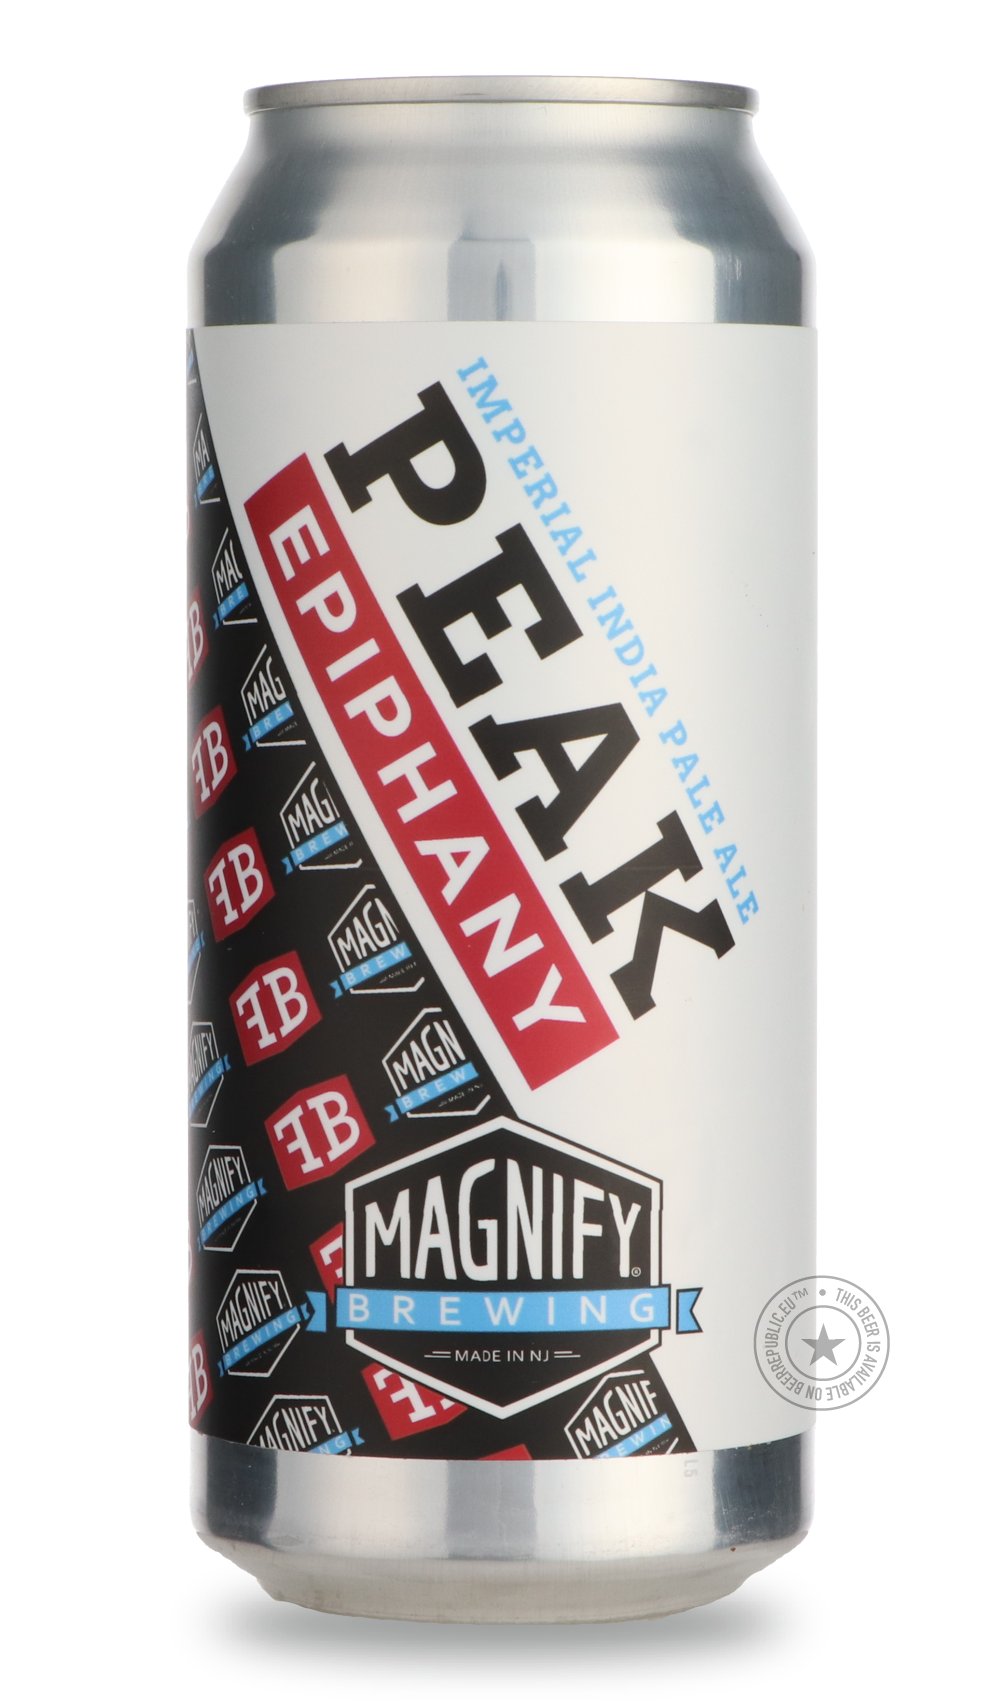 -Magnify- Peak Epiphany / Foundation-IPA- Only @ Beer Republic - The best online beer store for American & Canadian craft beer - Buy beer online from the USA and Canada - Bier online kopen - Amerikaans bier kopen - Craft beer store - Craft beer kopen - Amerikanisch bier kaufen - Bier online kaufen - Acheter biere online - IPA - Stout - Porter - New England IPA - Hazy IPA - Imperial Stout - Barrel Aged - Barrel Aged Imperial Stout - Brown - Dark beer - Blond - Blonde - Pilsner - Lager - Wheat - Weizen - Ambe